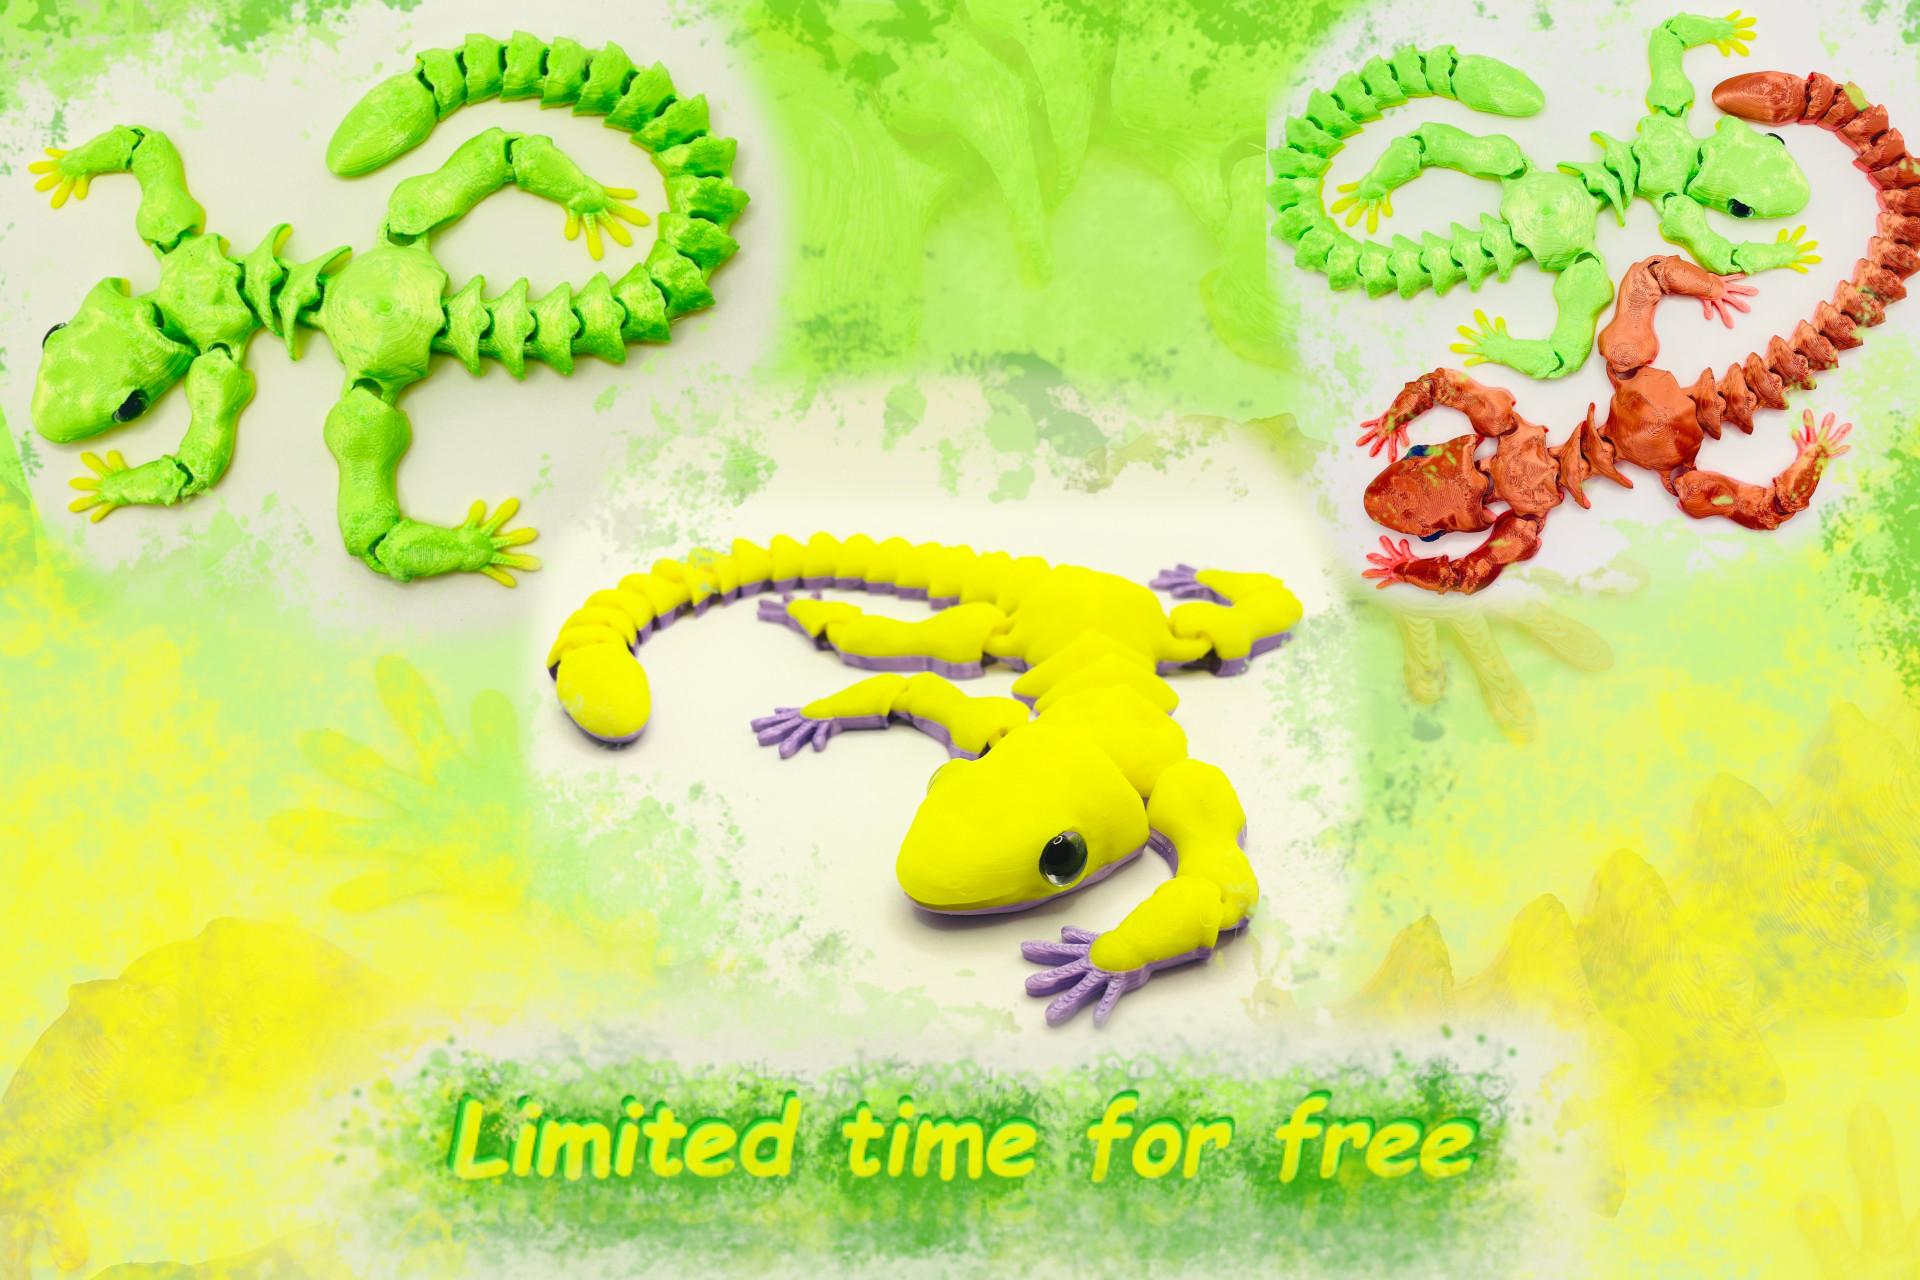 Funny Lizard - articulated fidget toy - NOW AVAILABLE